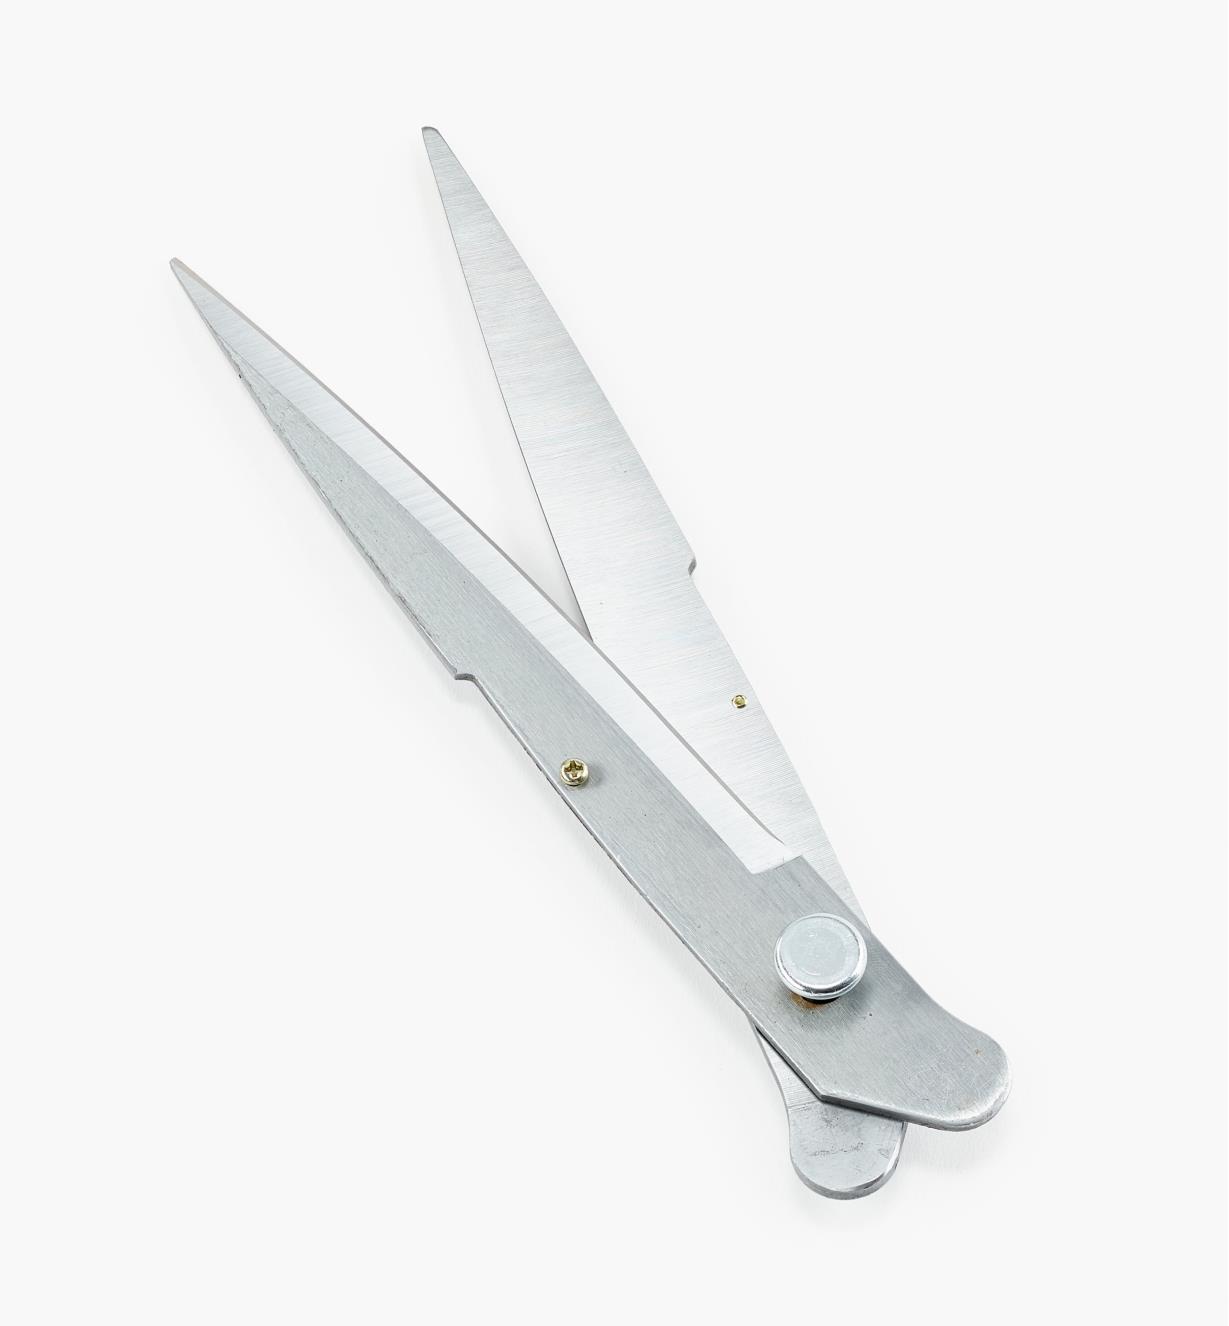 EC528 - Replacement Blade for Long-Handled Shears